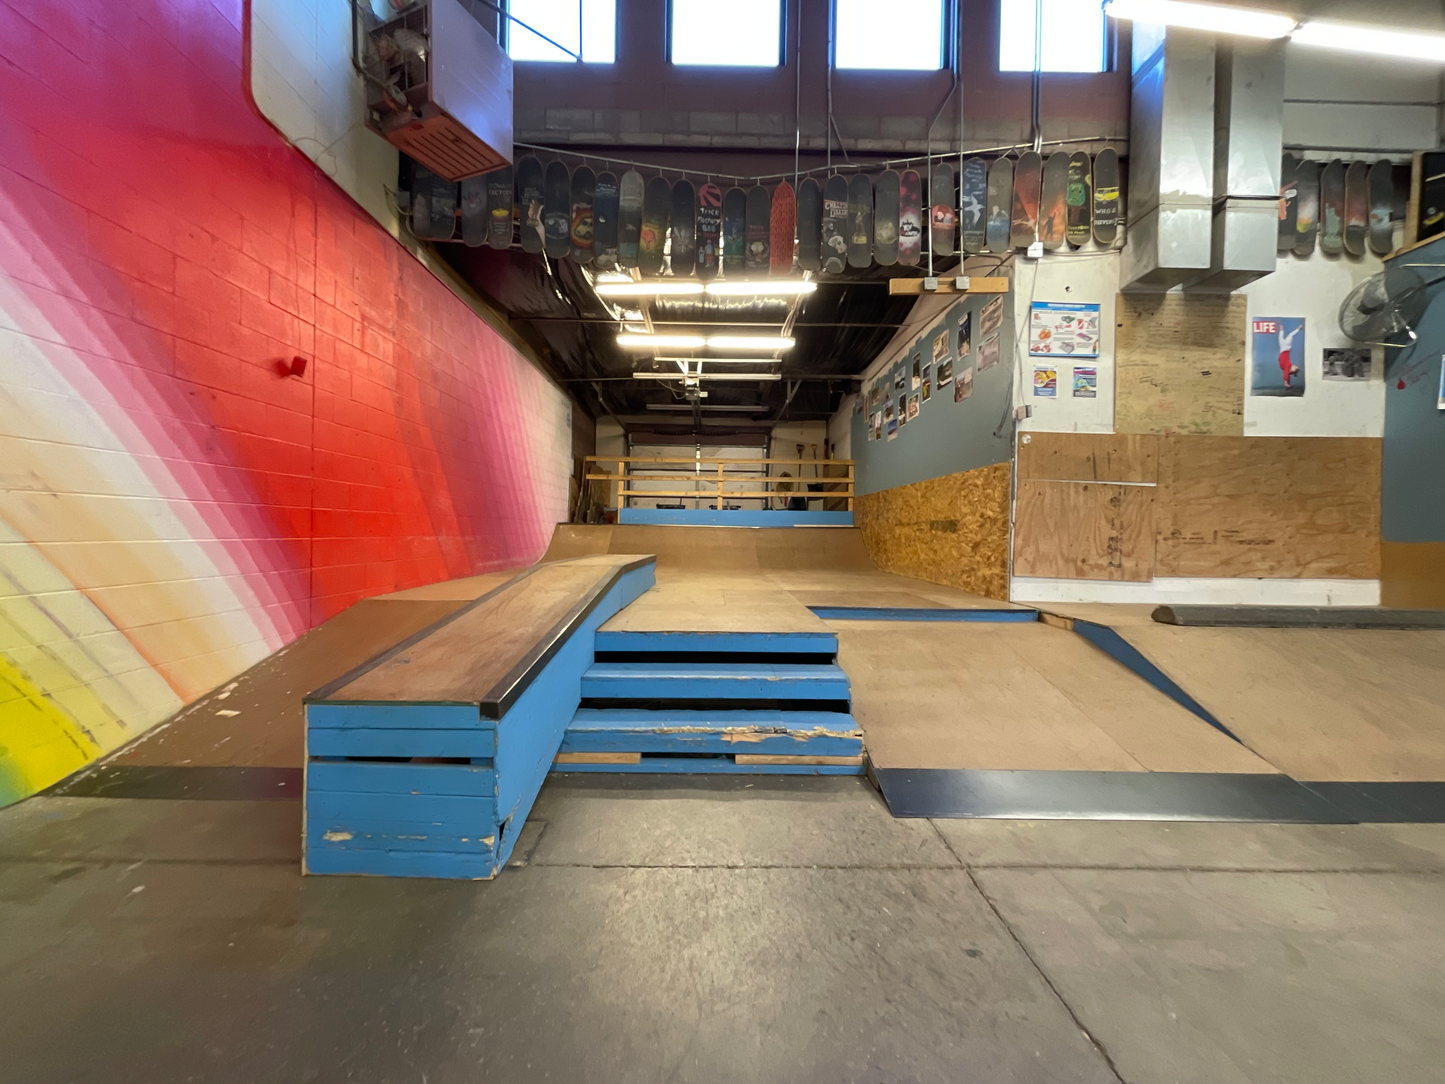 Tackle the Skate Park Safely - Indoors!